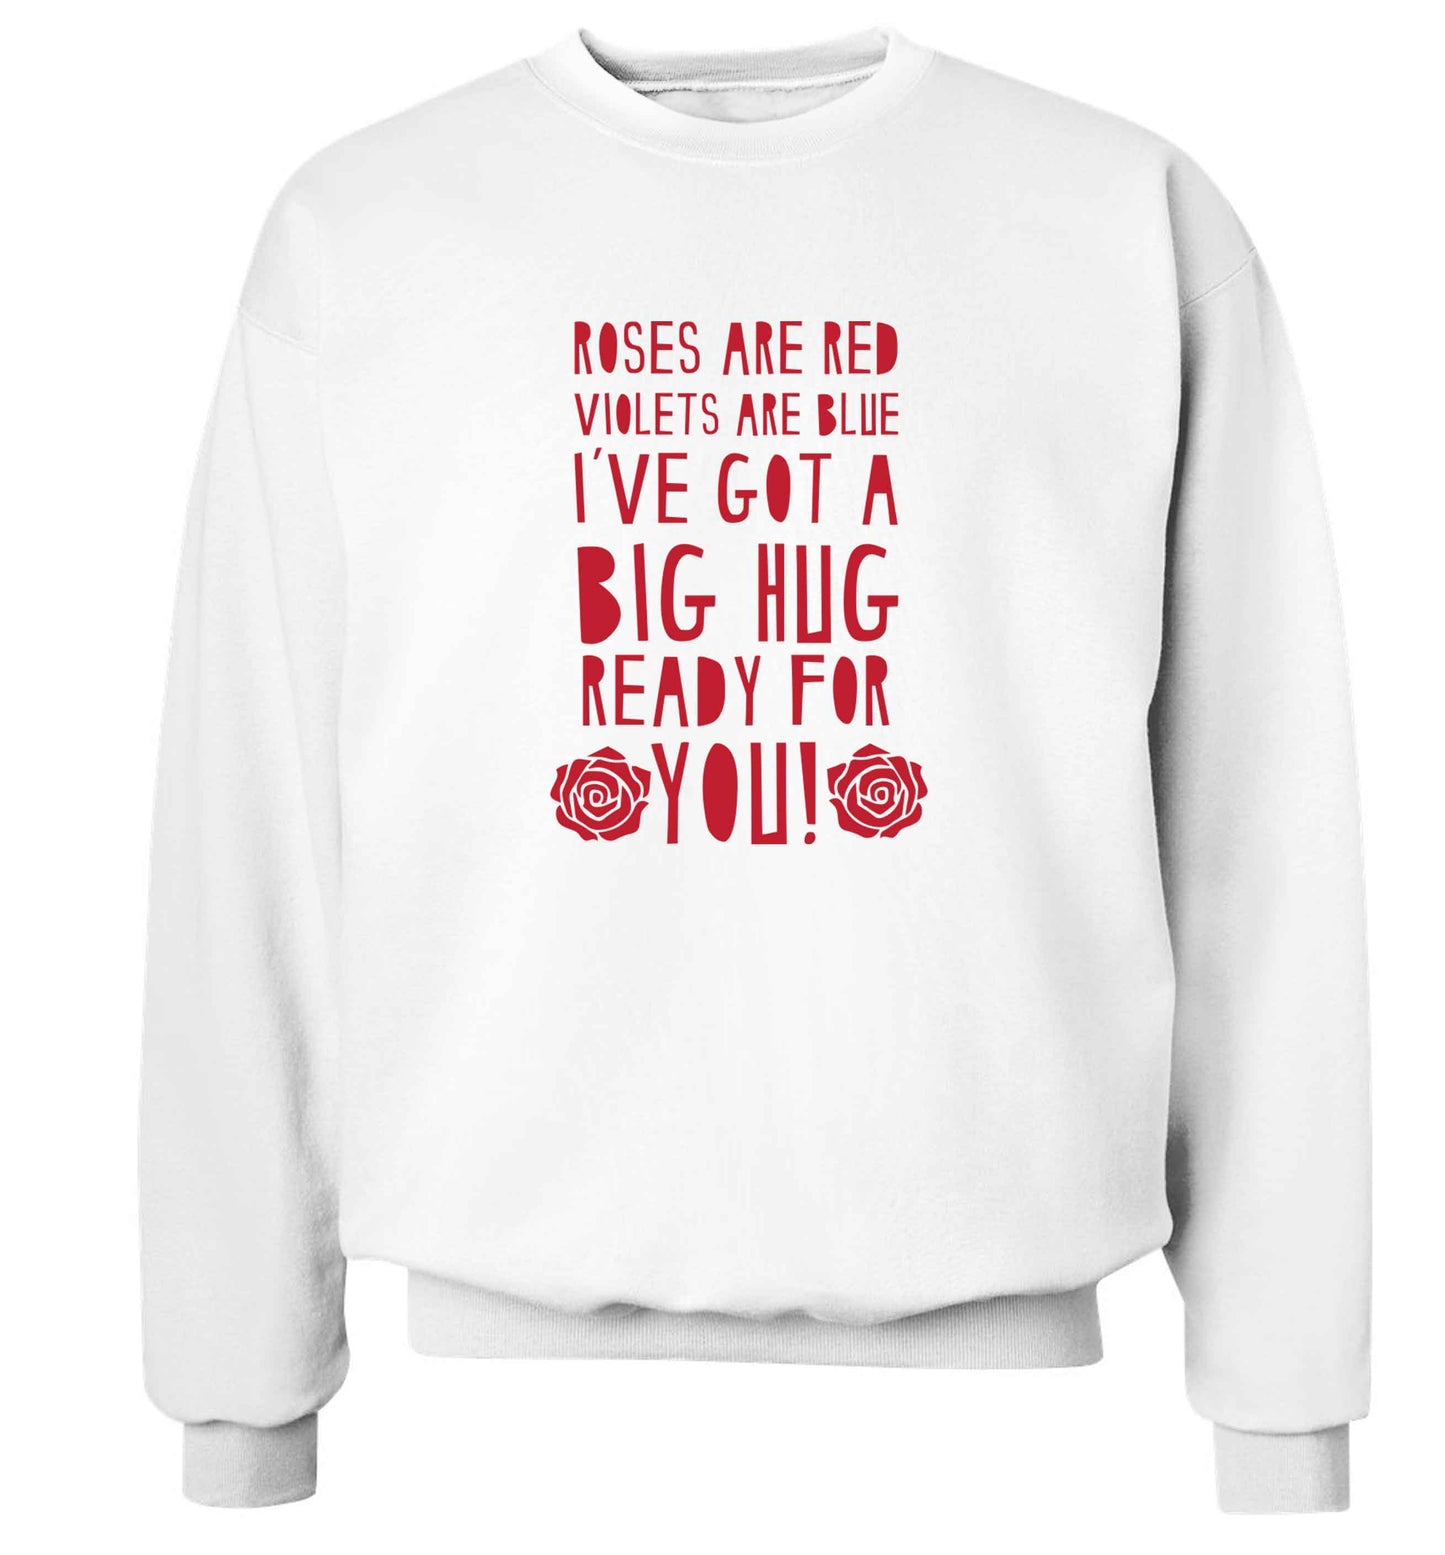 Roses are red violets are blue I've got a big hug coming for you adult's unisex white sweater 2XL